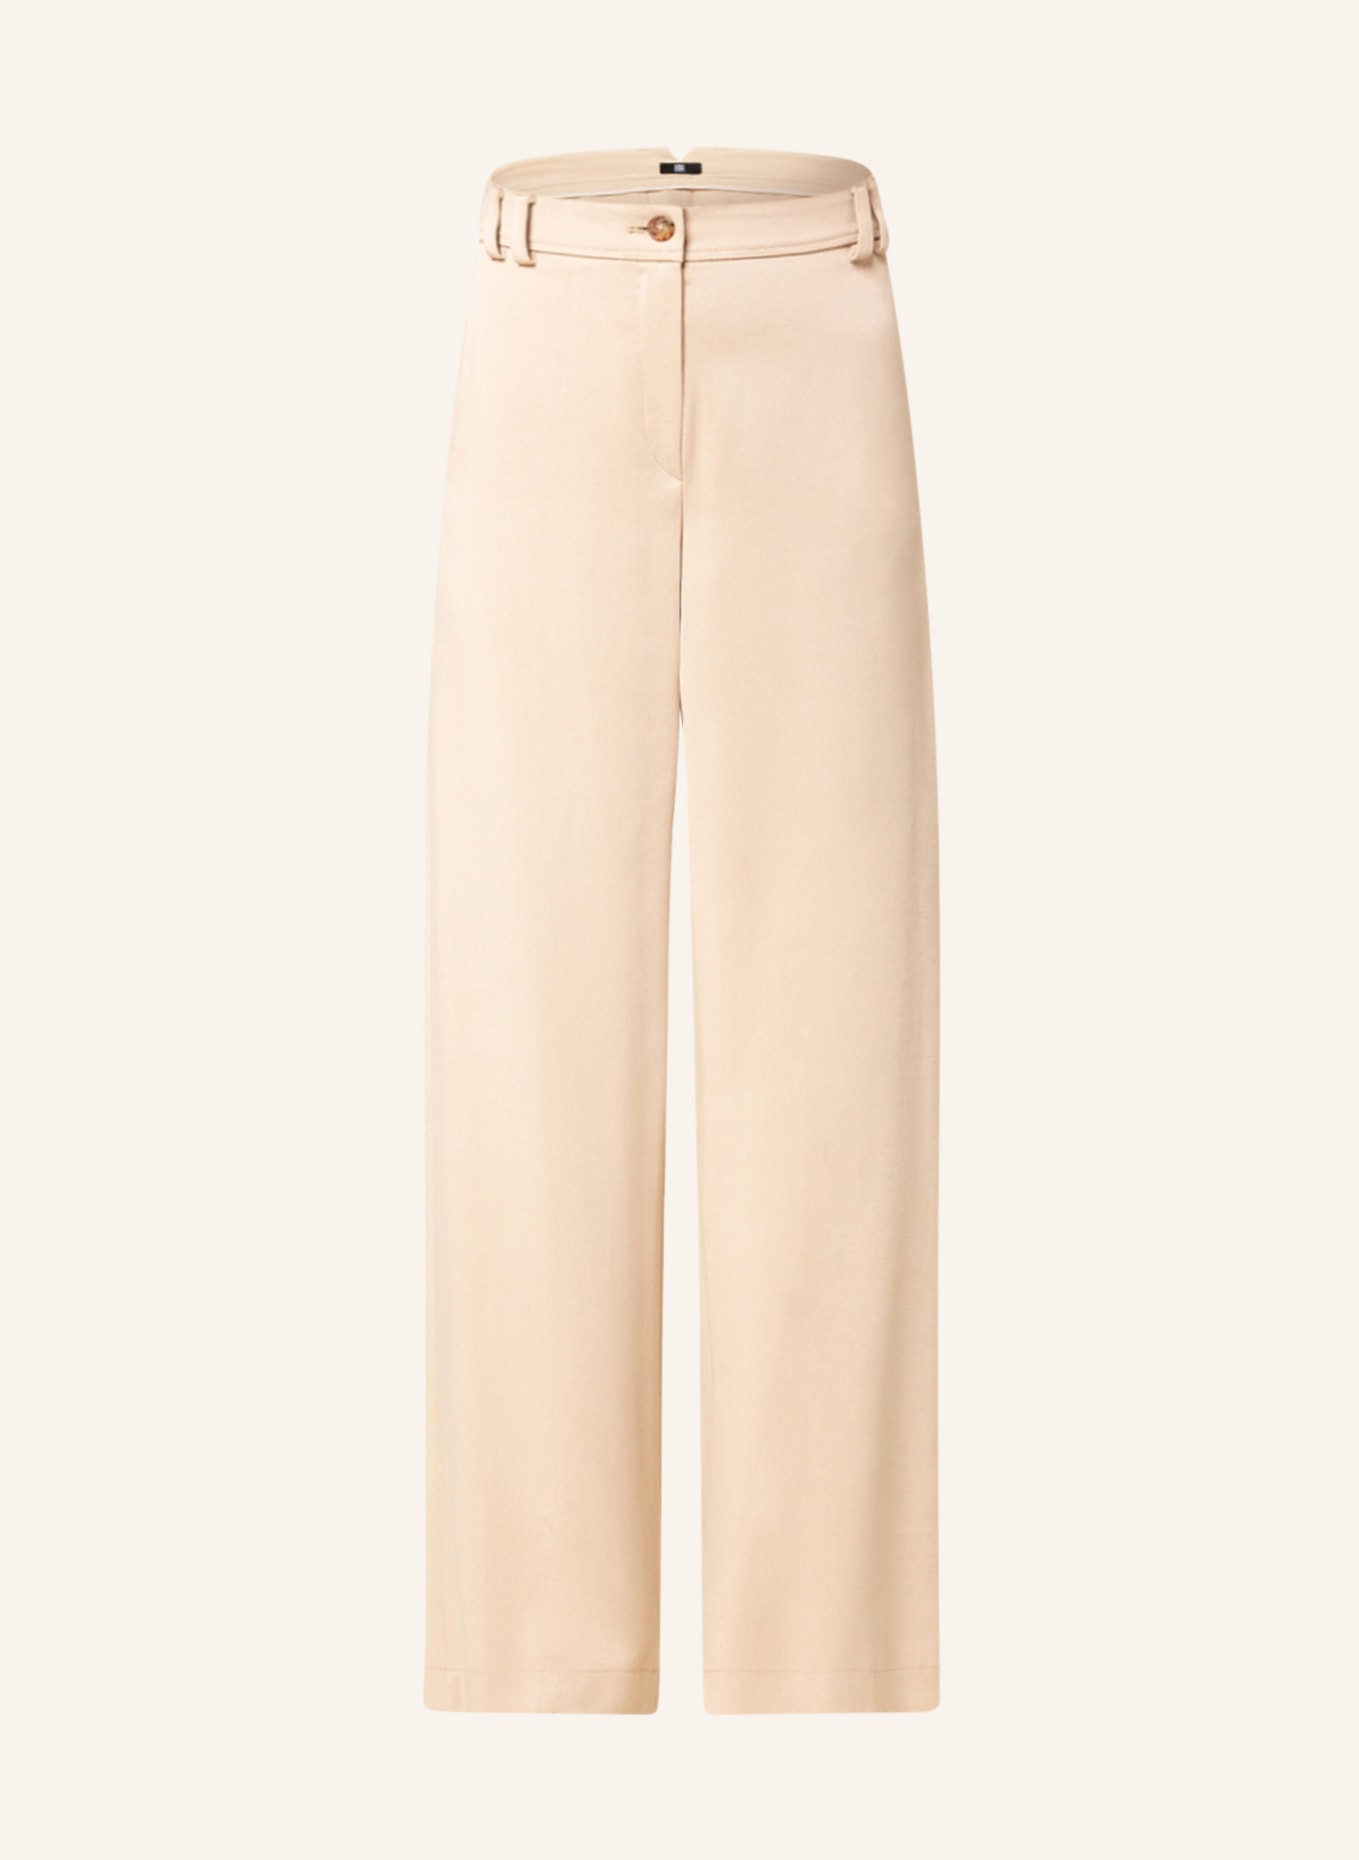 RIANI Leather trousers in beige